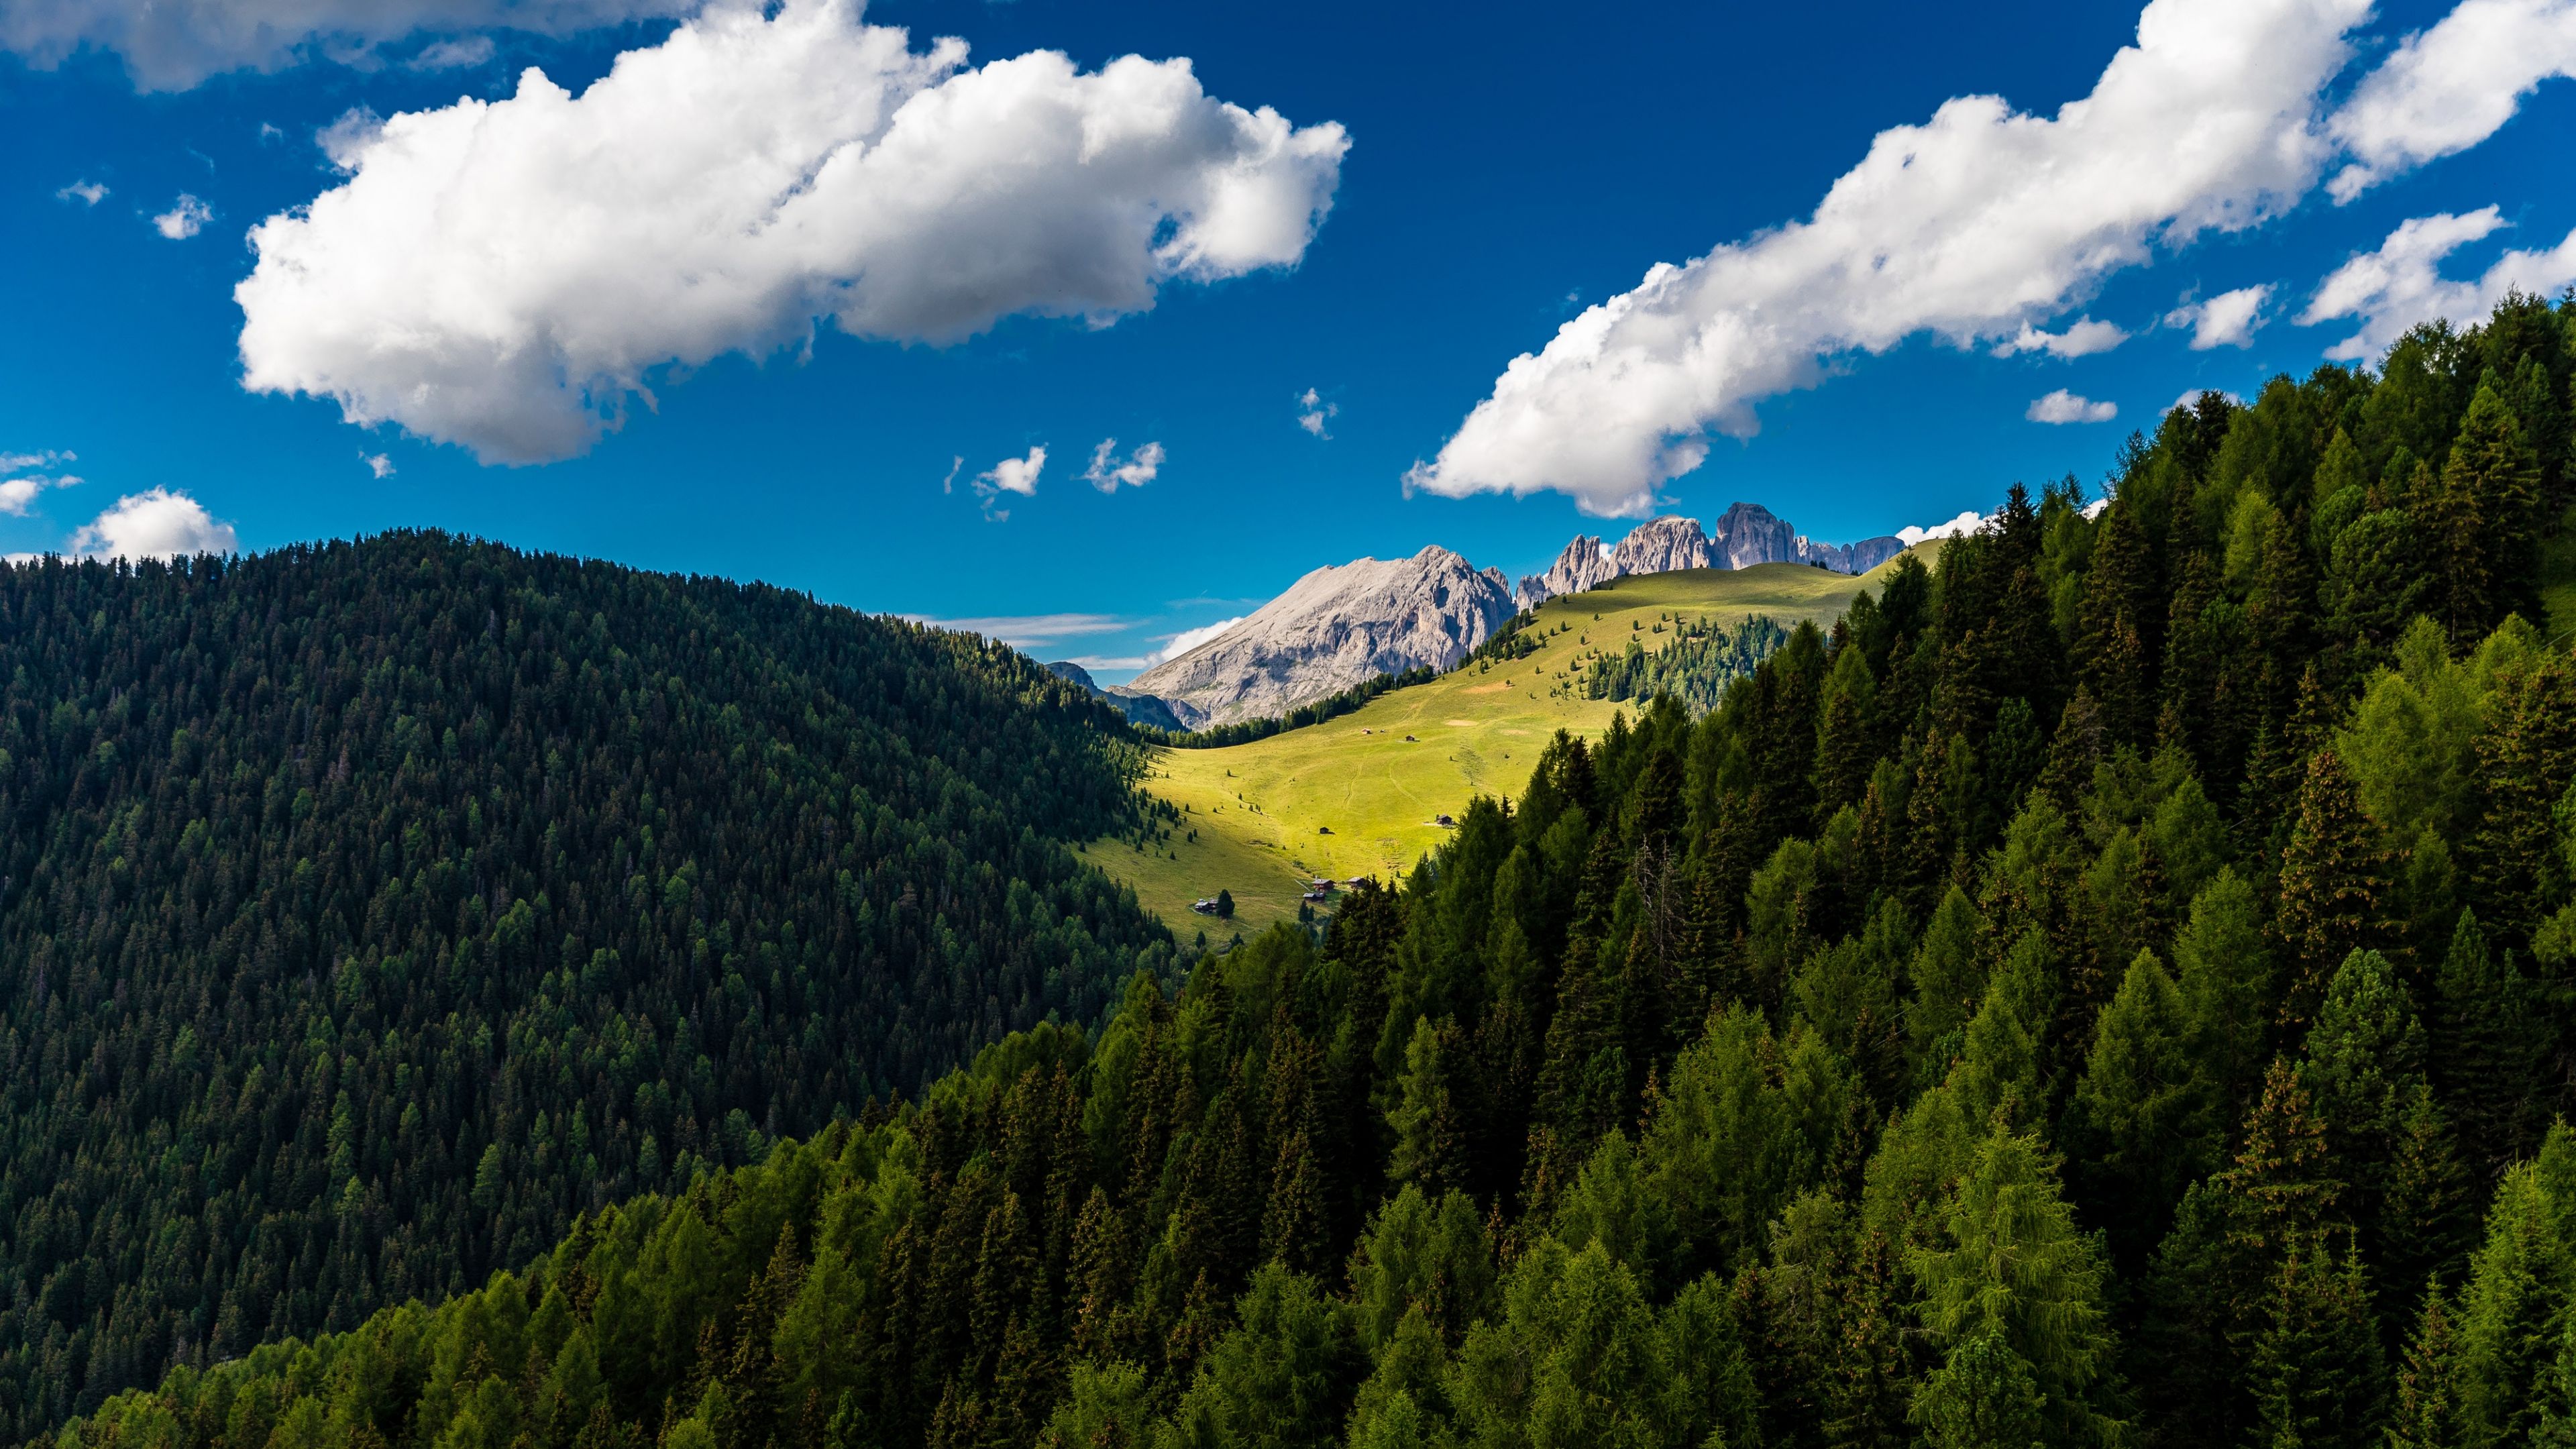 Download 3840x2160 wallpaper trees, mountains, clouds, summer, sunny day, 4k, uhd 16: widescreen, 3840x2160 HD image, background, 699